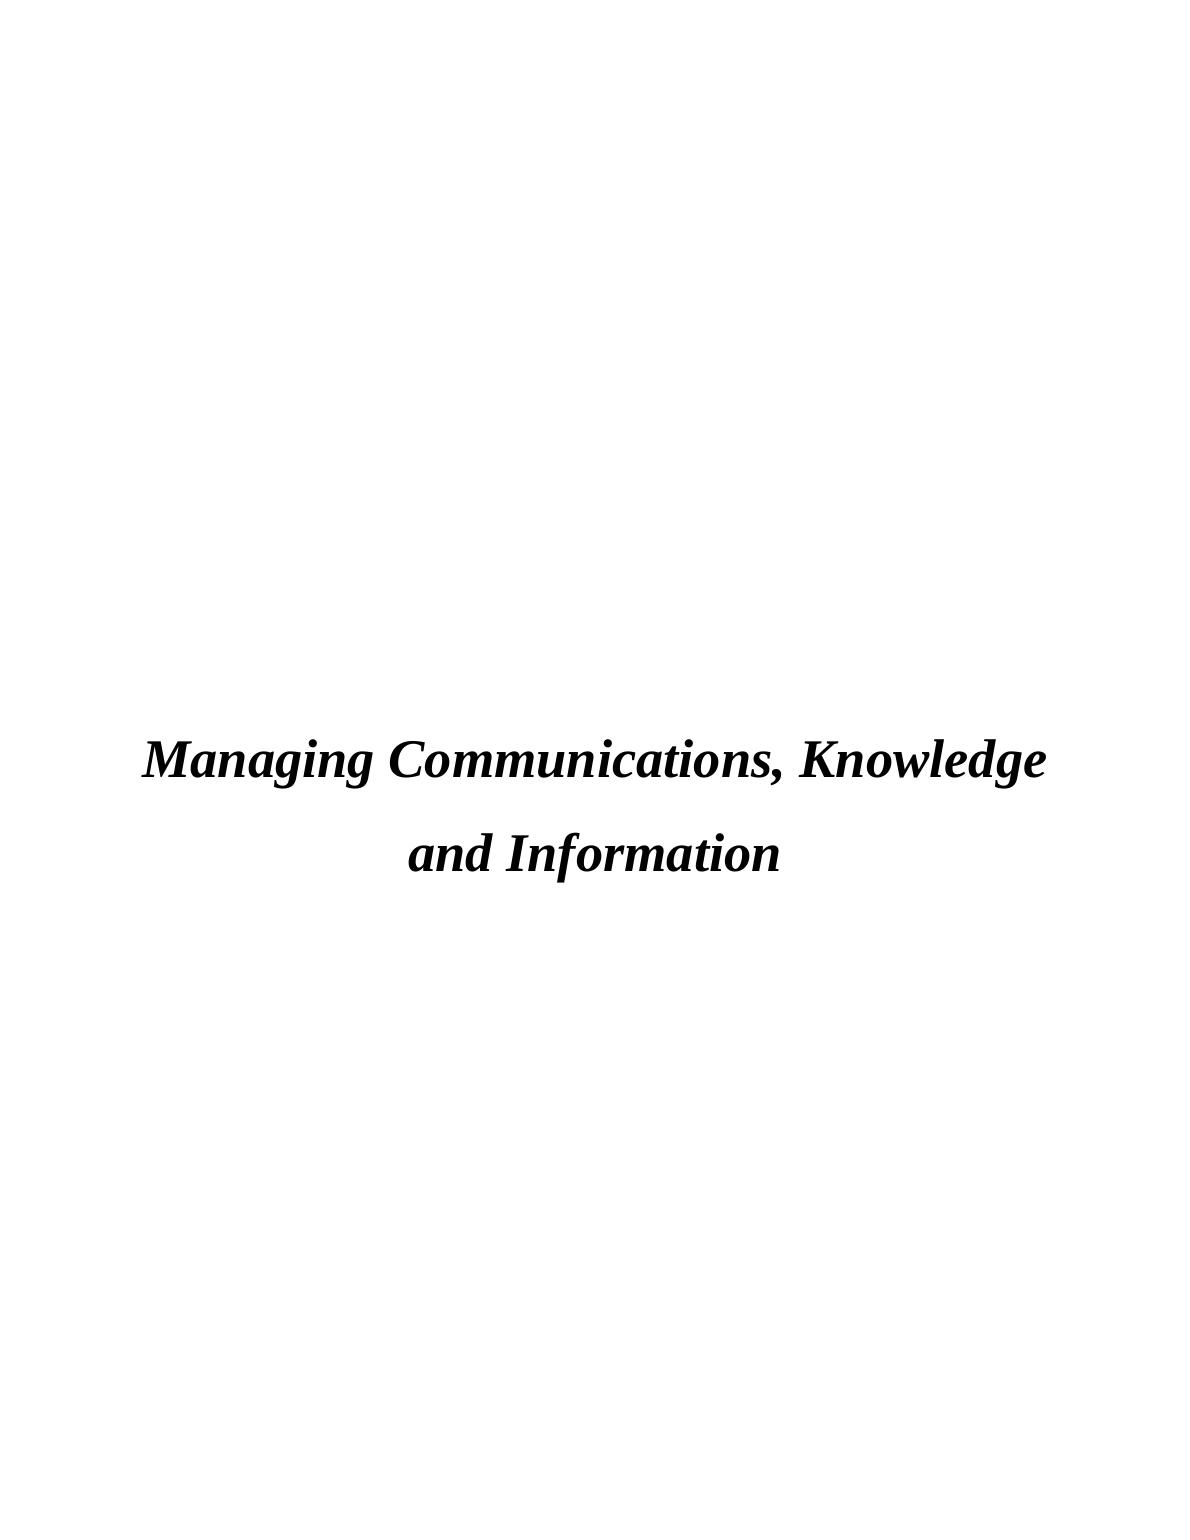 Managing Communications, Knowledge and Information : Report_1